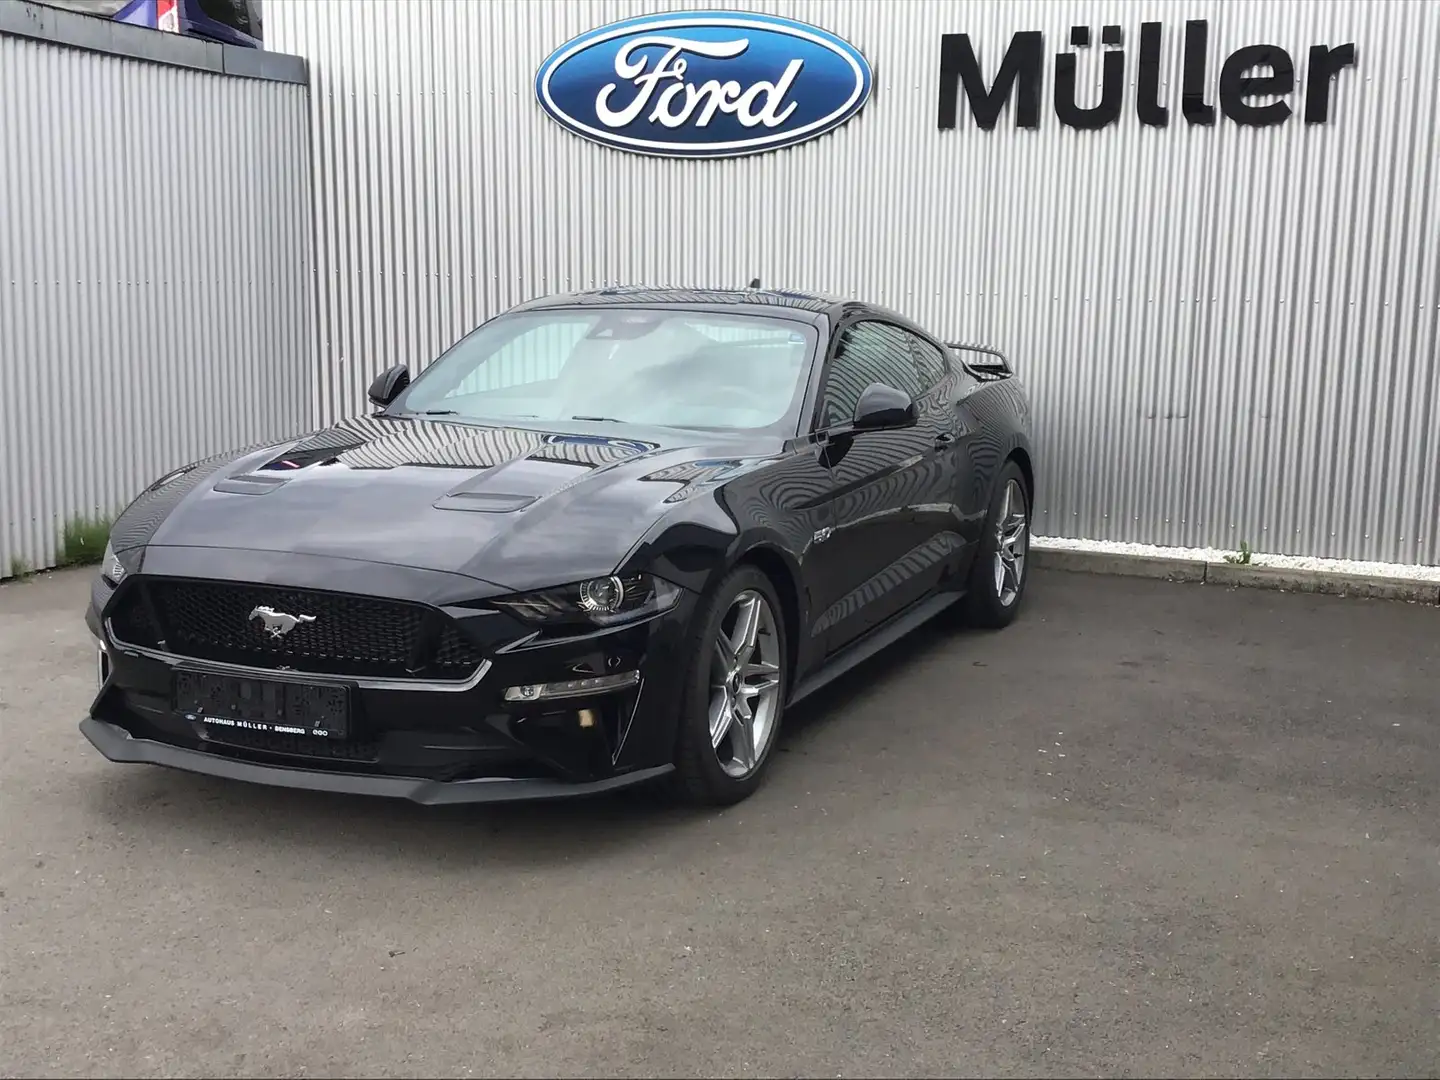 Ford Mustang 5,0 l V8 450PS Automatik Fekete - 1